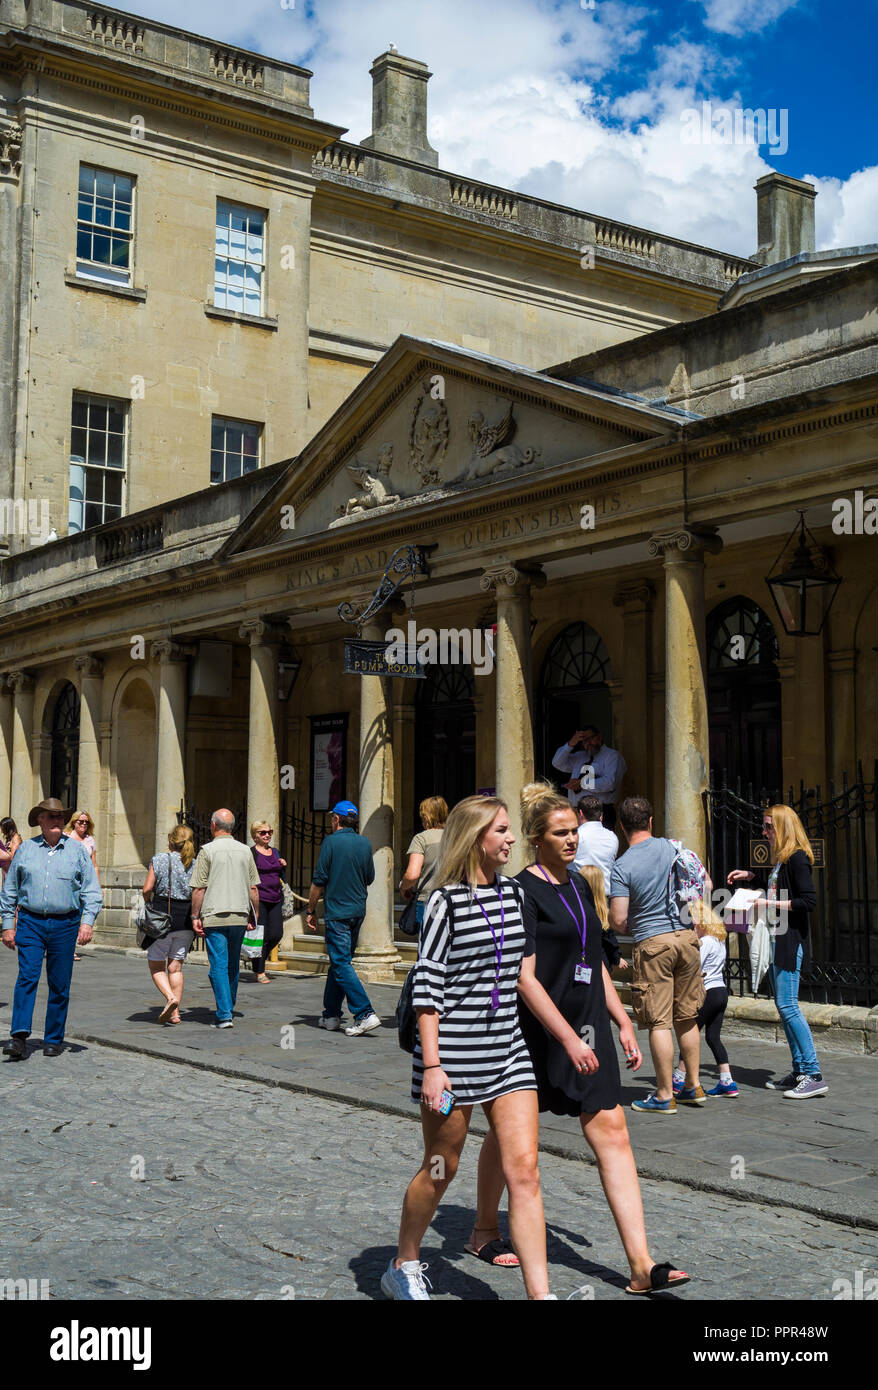 Exterior of the Pump Room restaurant on Stall Street, fine dining venue located above the Roman Baths, Bath, Somerset, England, UK Stock Photo